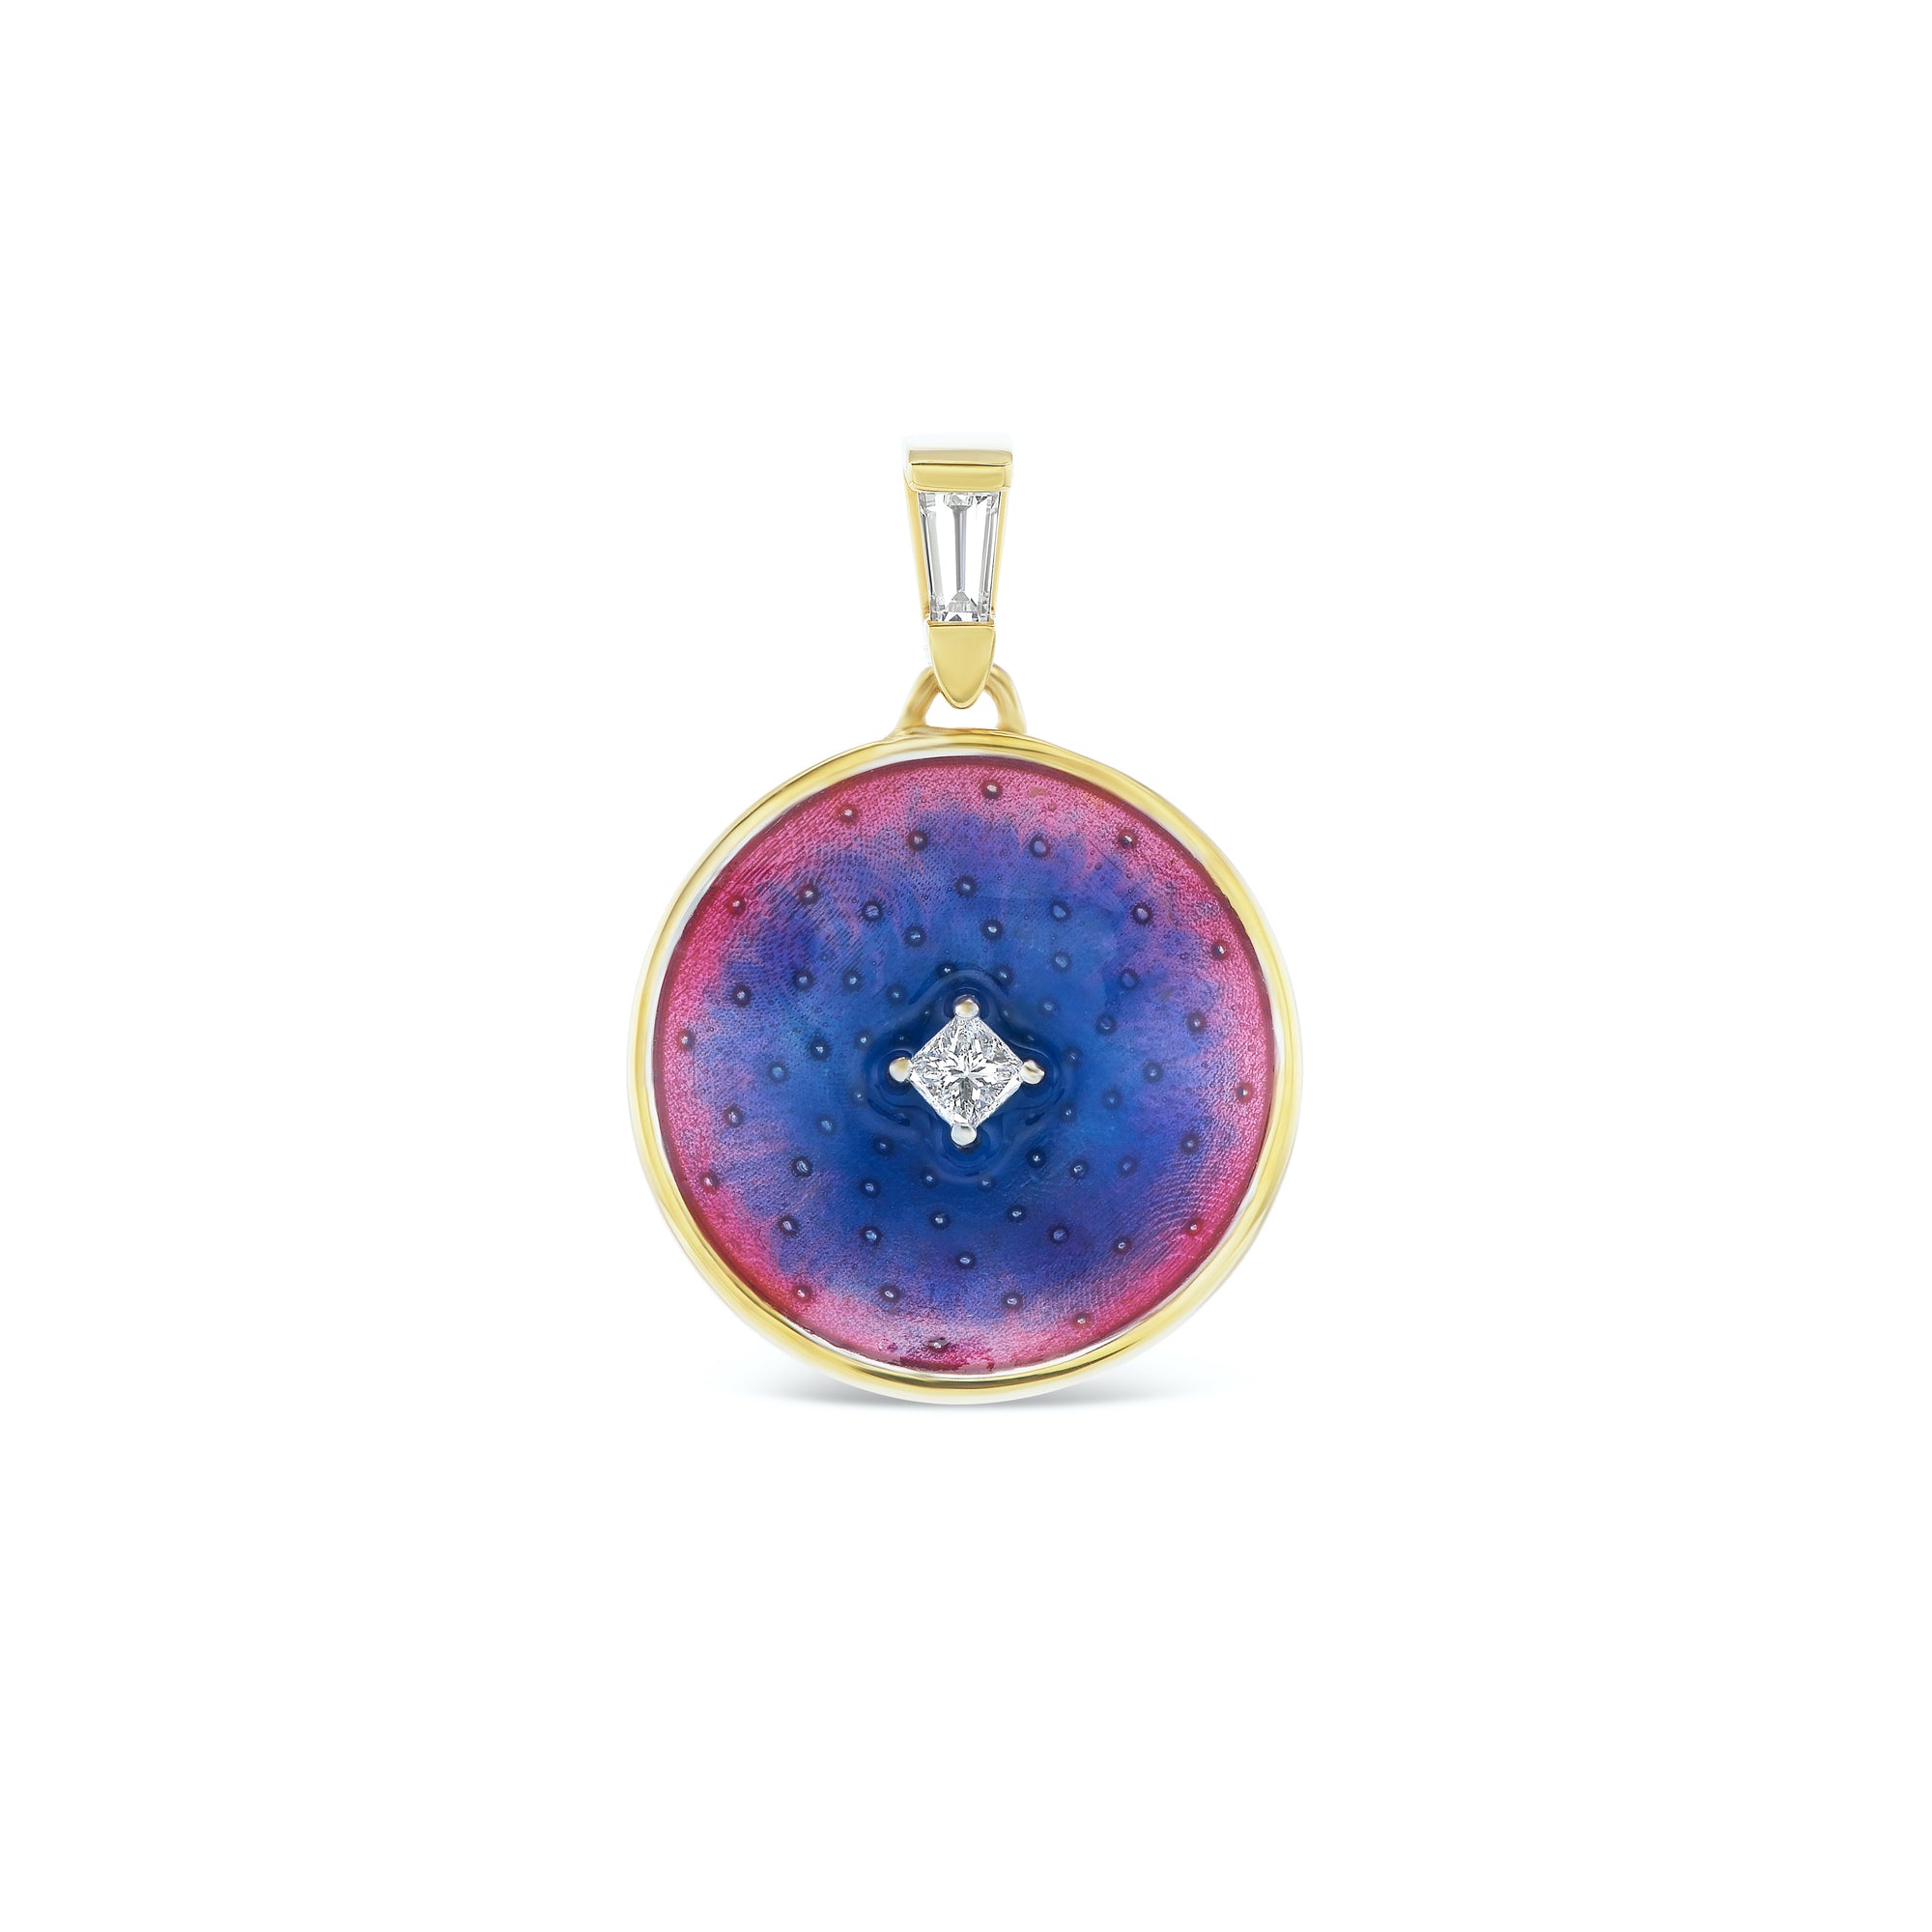 Cosmic Bloom Enamel Pendant Necklace by Meredith Young available at Talisman Collection Fine Jewelers in El Dorado Hills, CA and online. The artisan enamel detailing on this pendant brings a lively splash of color, creating a canvas for .14 cts of diamonds that twinkle like distant stars in a moonlit sky. Crafted to catch the eye, this 18k gold pendant emanates a positive cosmic energy.